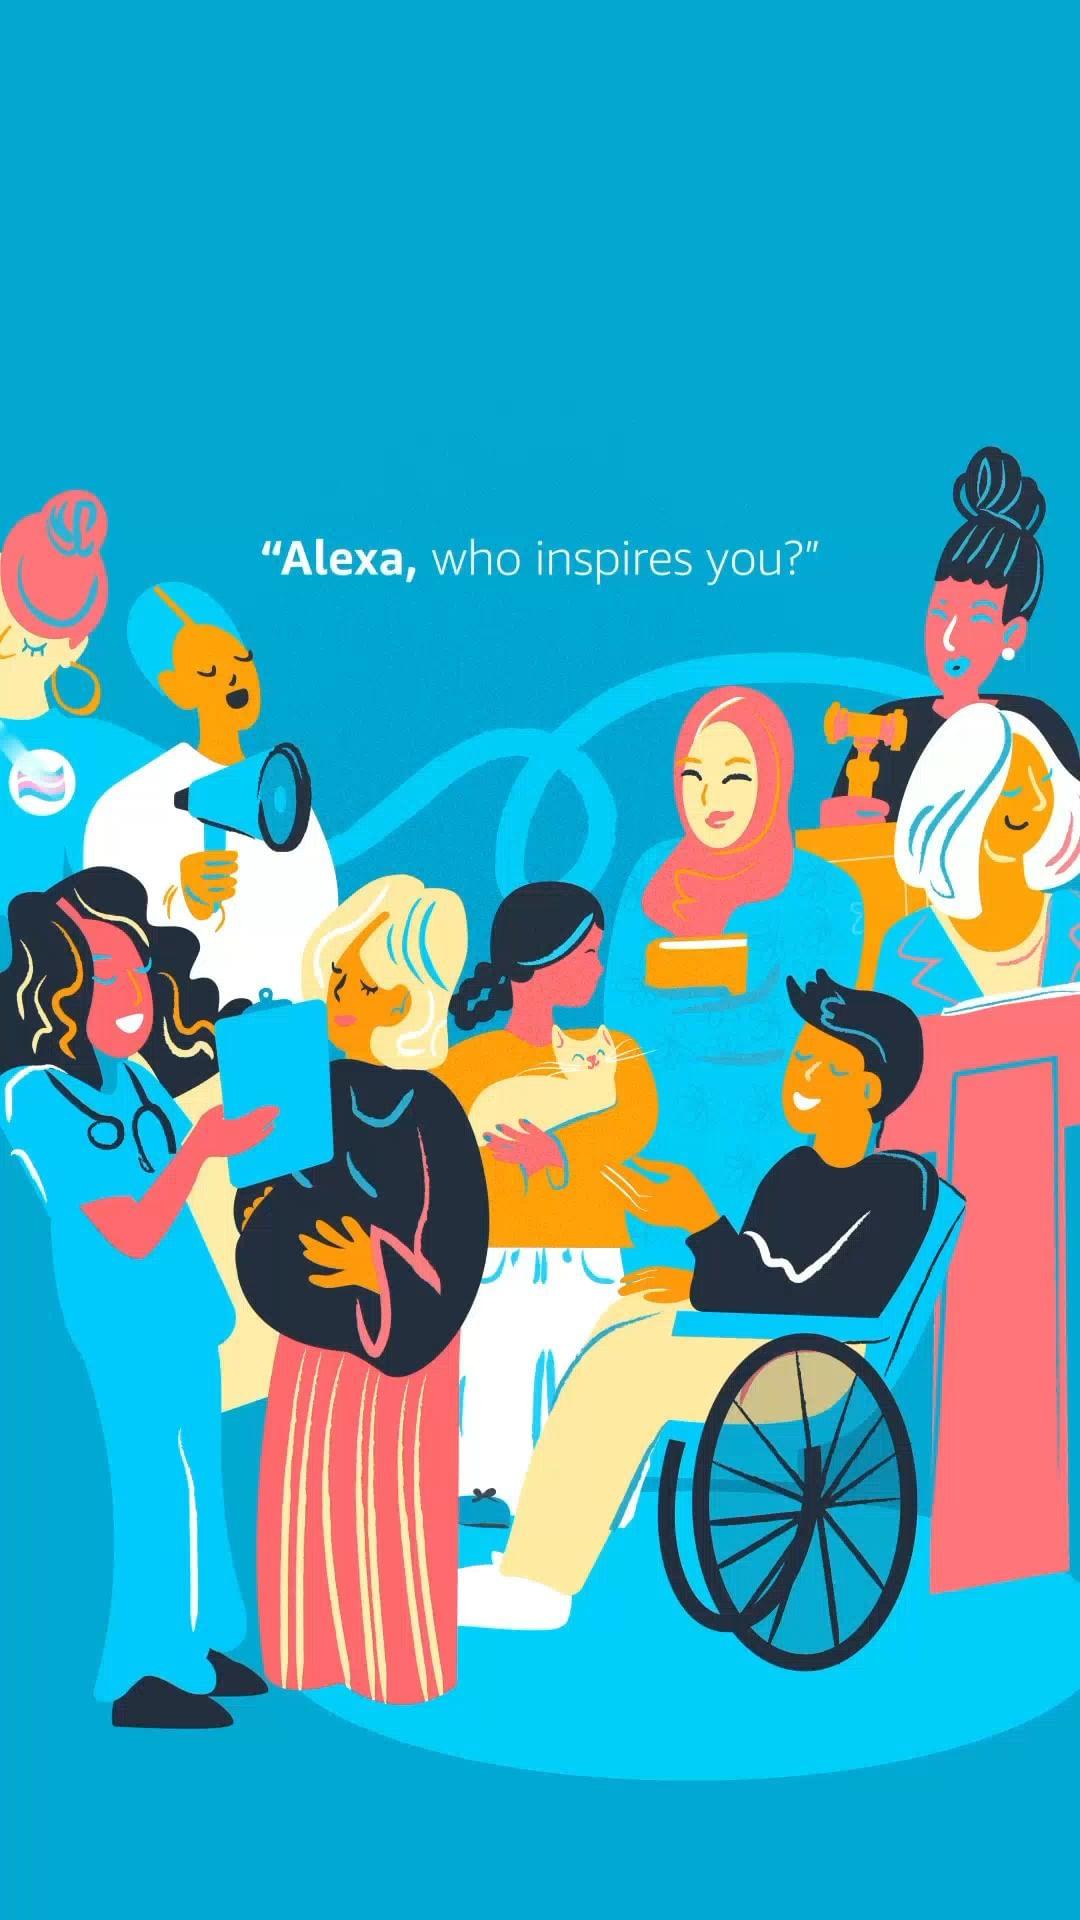 class="content__text"
 Join me this #InternationalWomensDay and every day in celebrating women everywhere. Just say, “Alexa, who inspires you?" to learn more about women in history. 
 